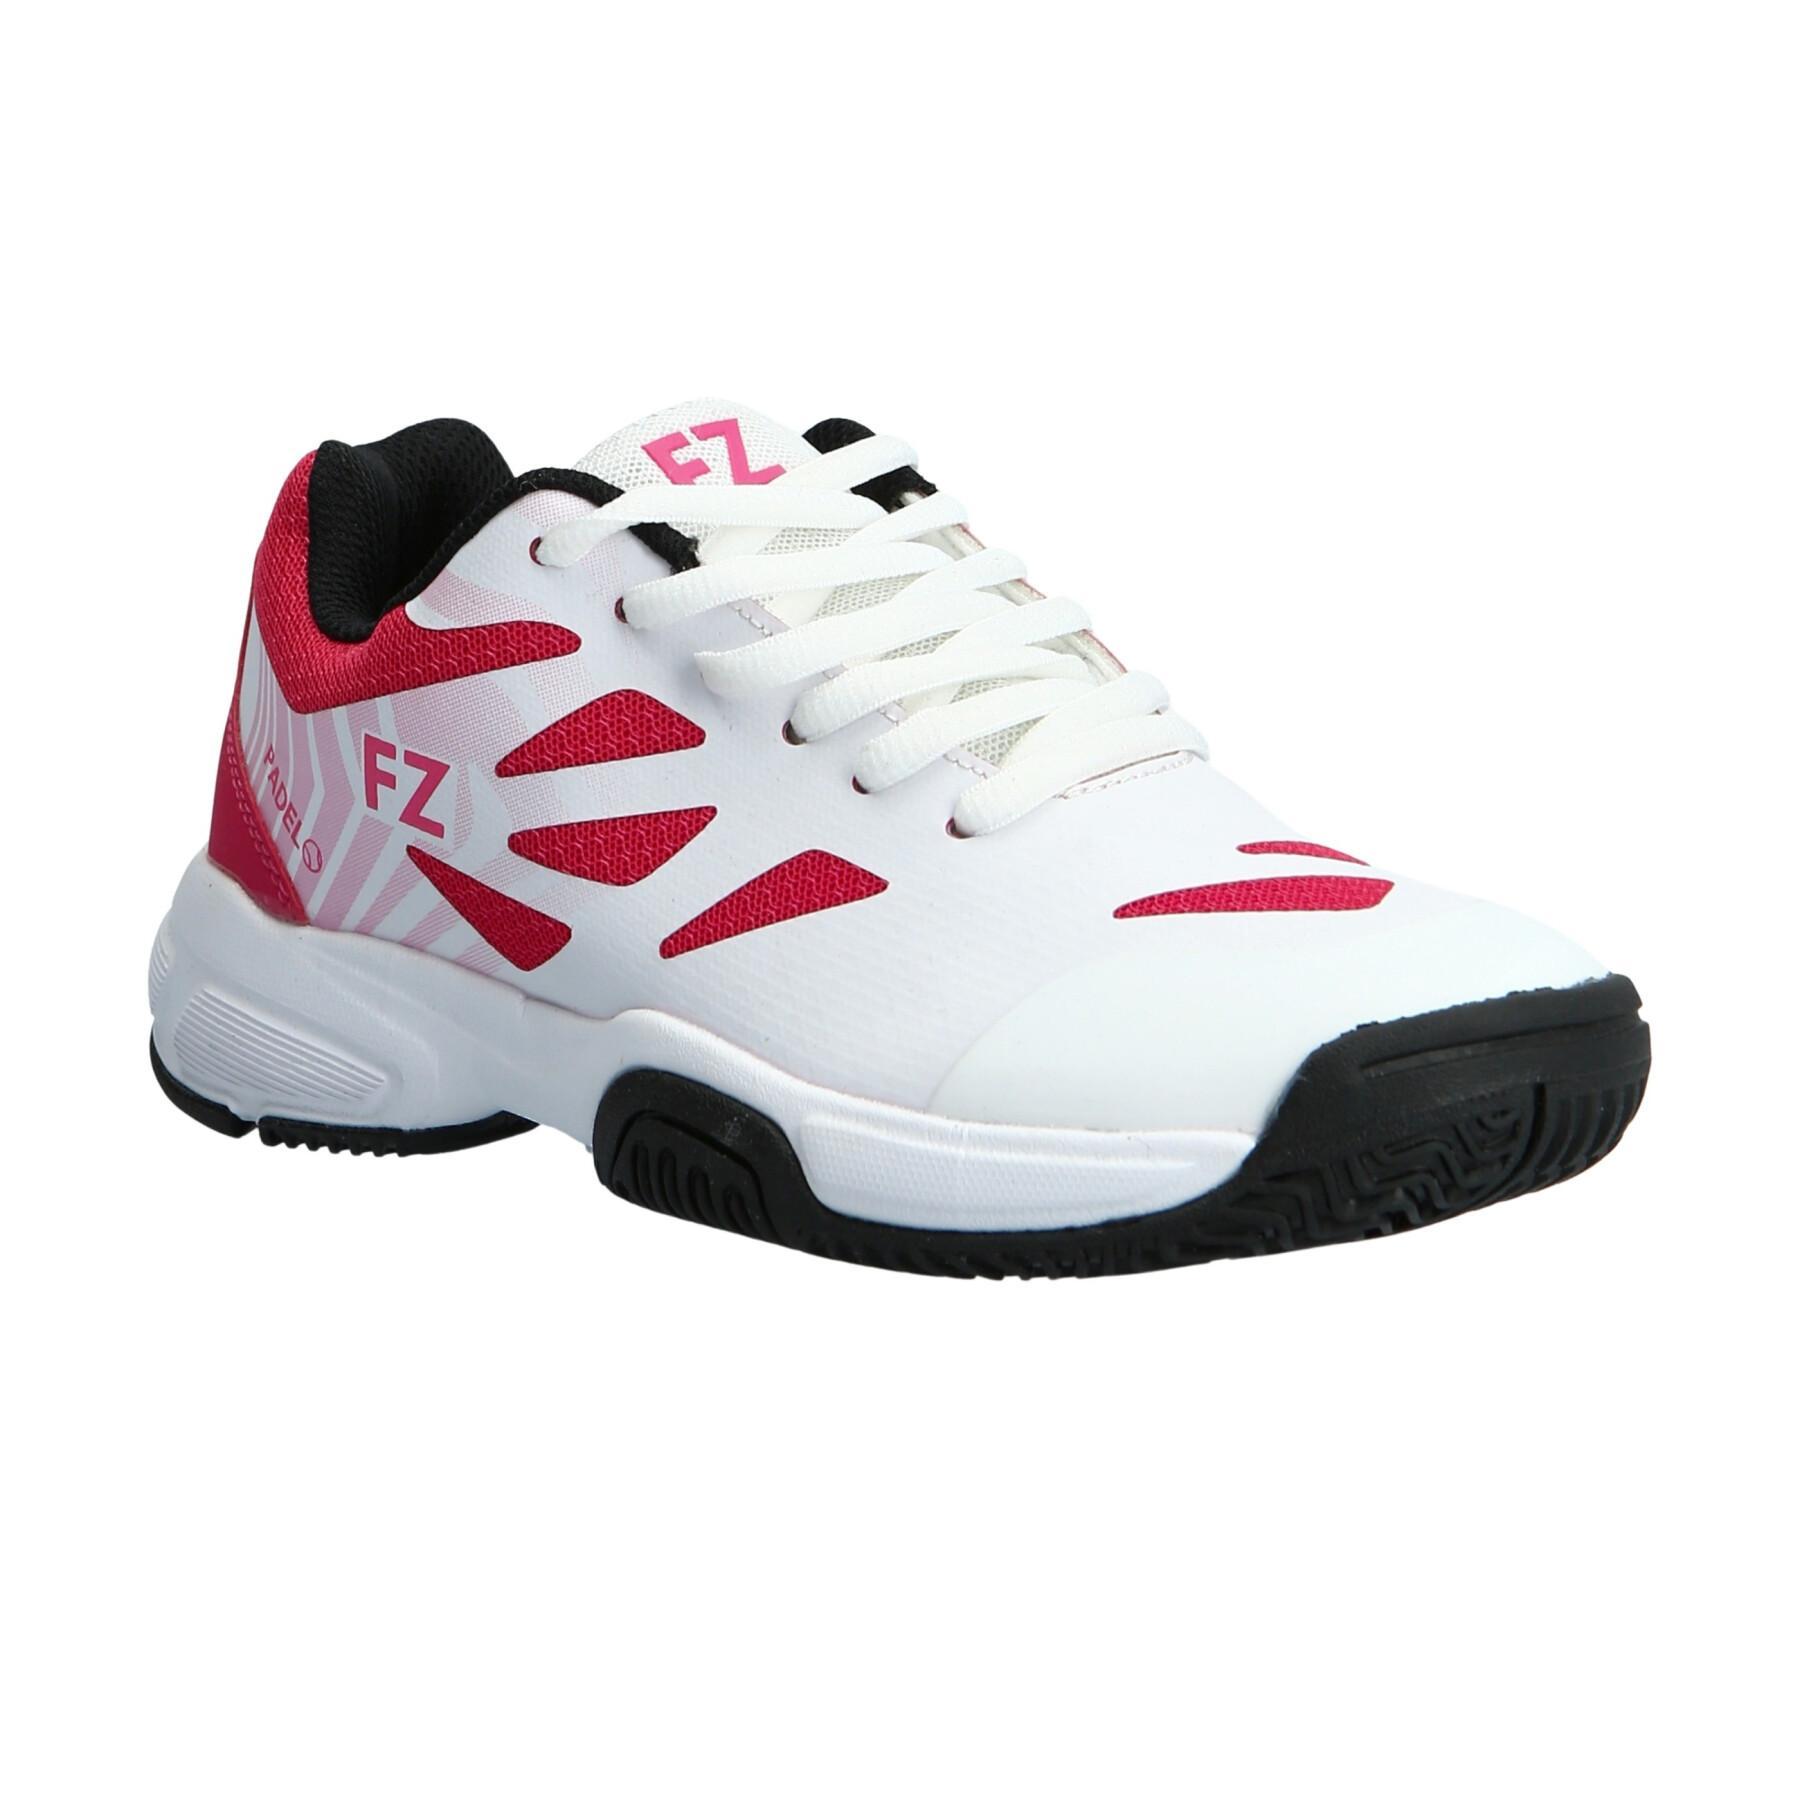 Indoor shoes for women FZ Forza Leander